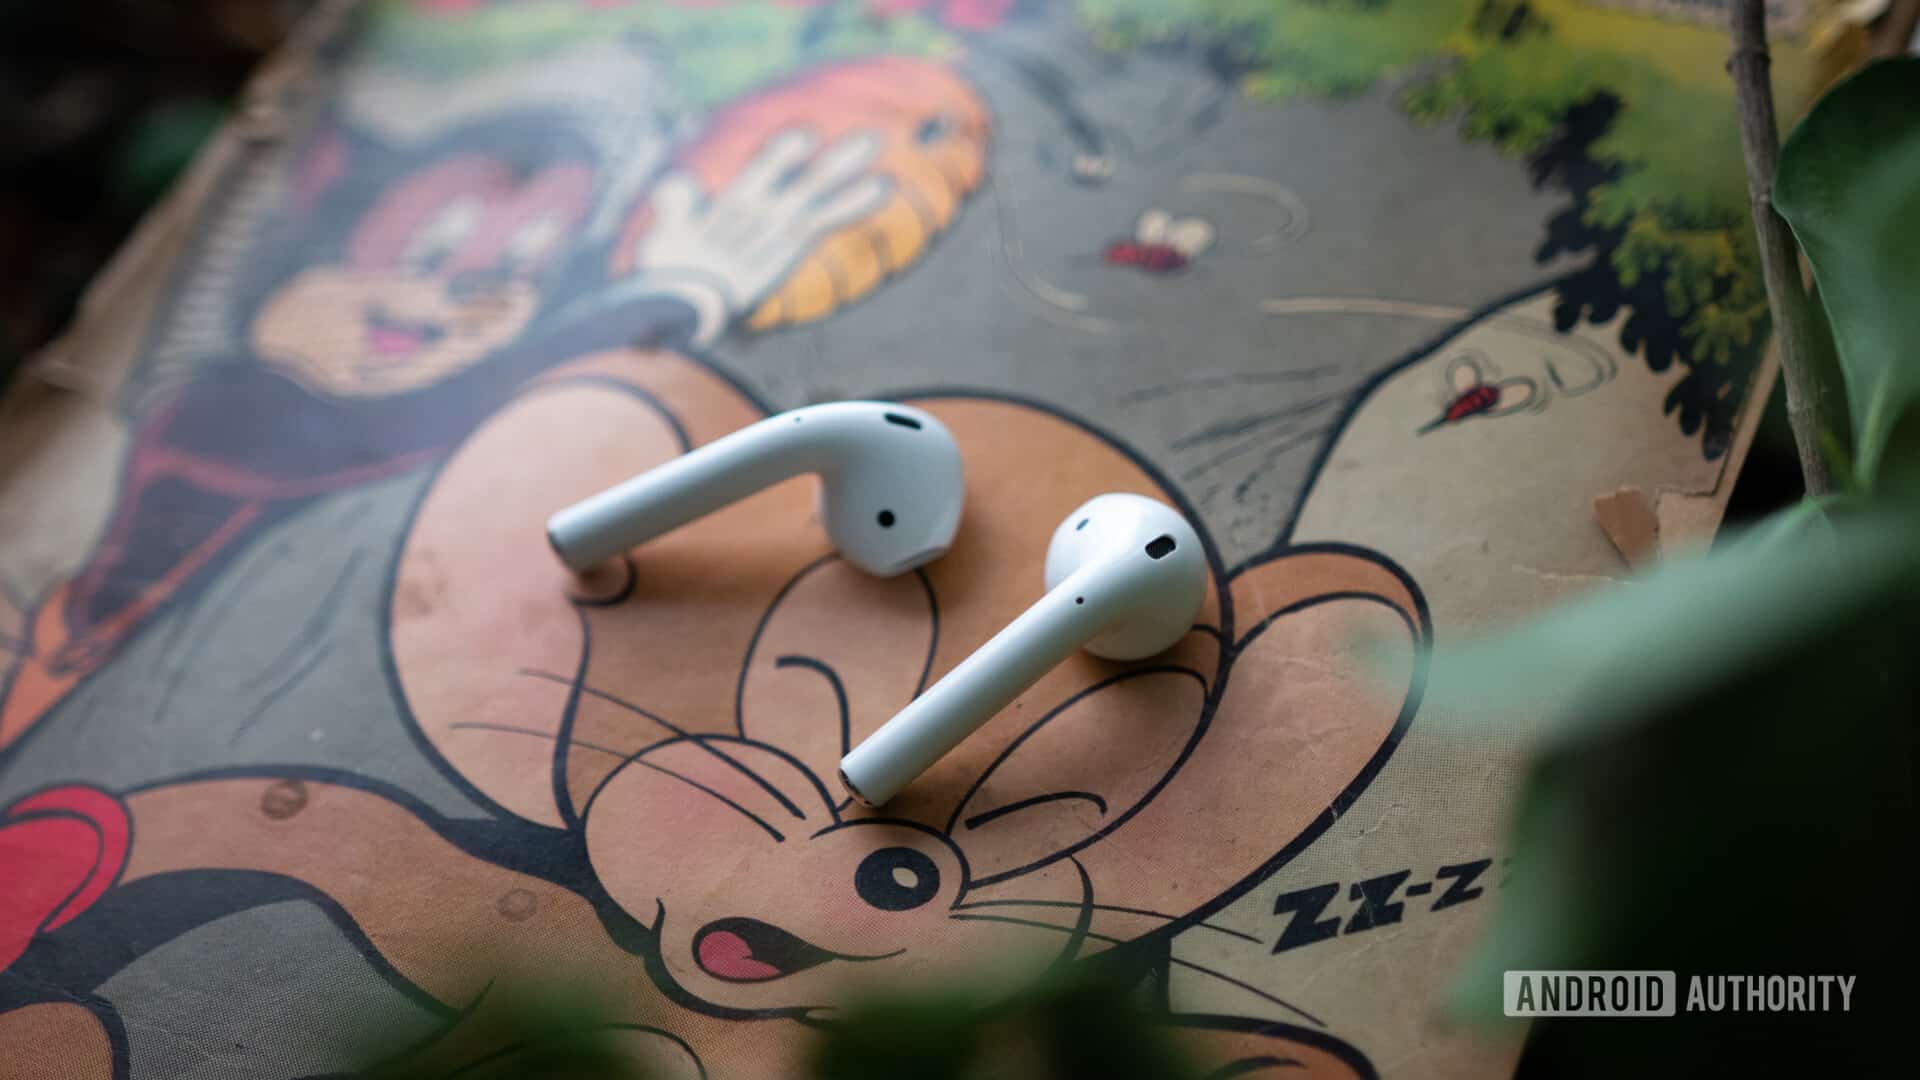 New AirPods 2 on comic book.